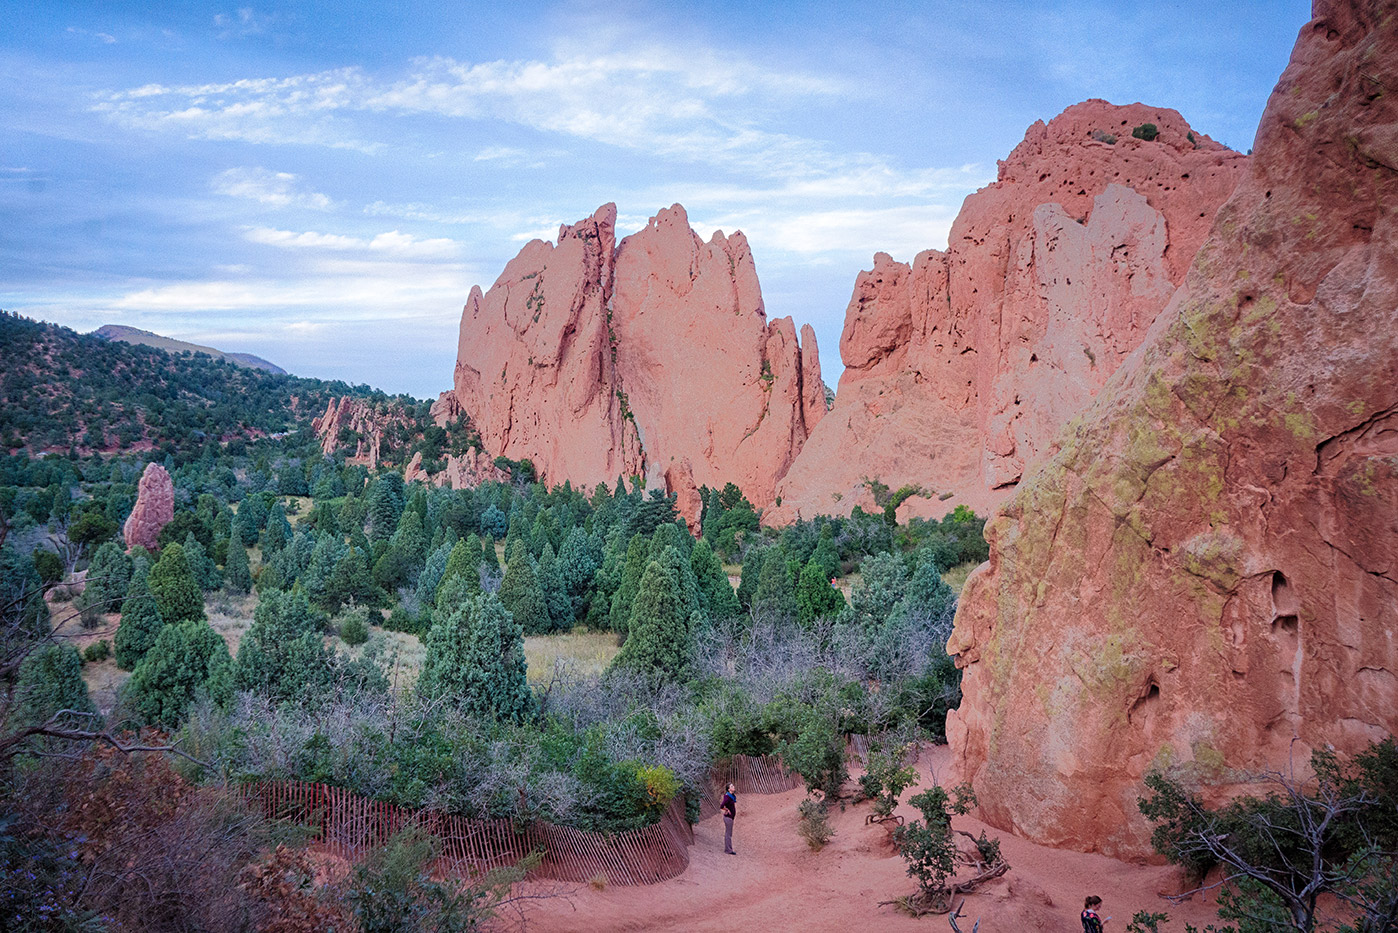 Near Cathedral Spires at Garden of the Gods